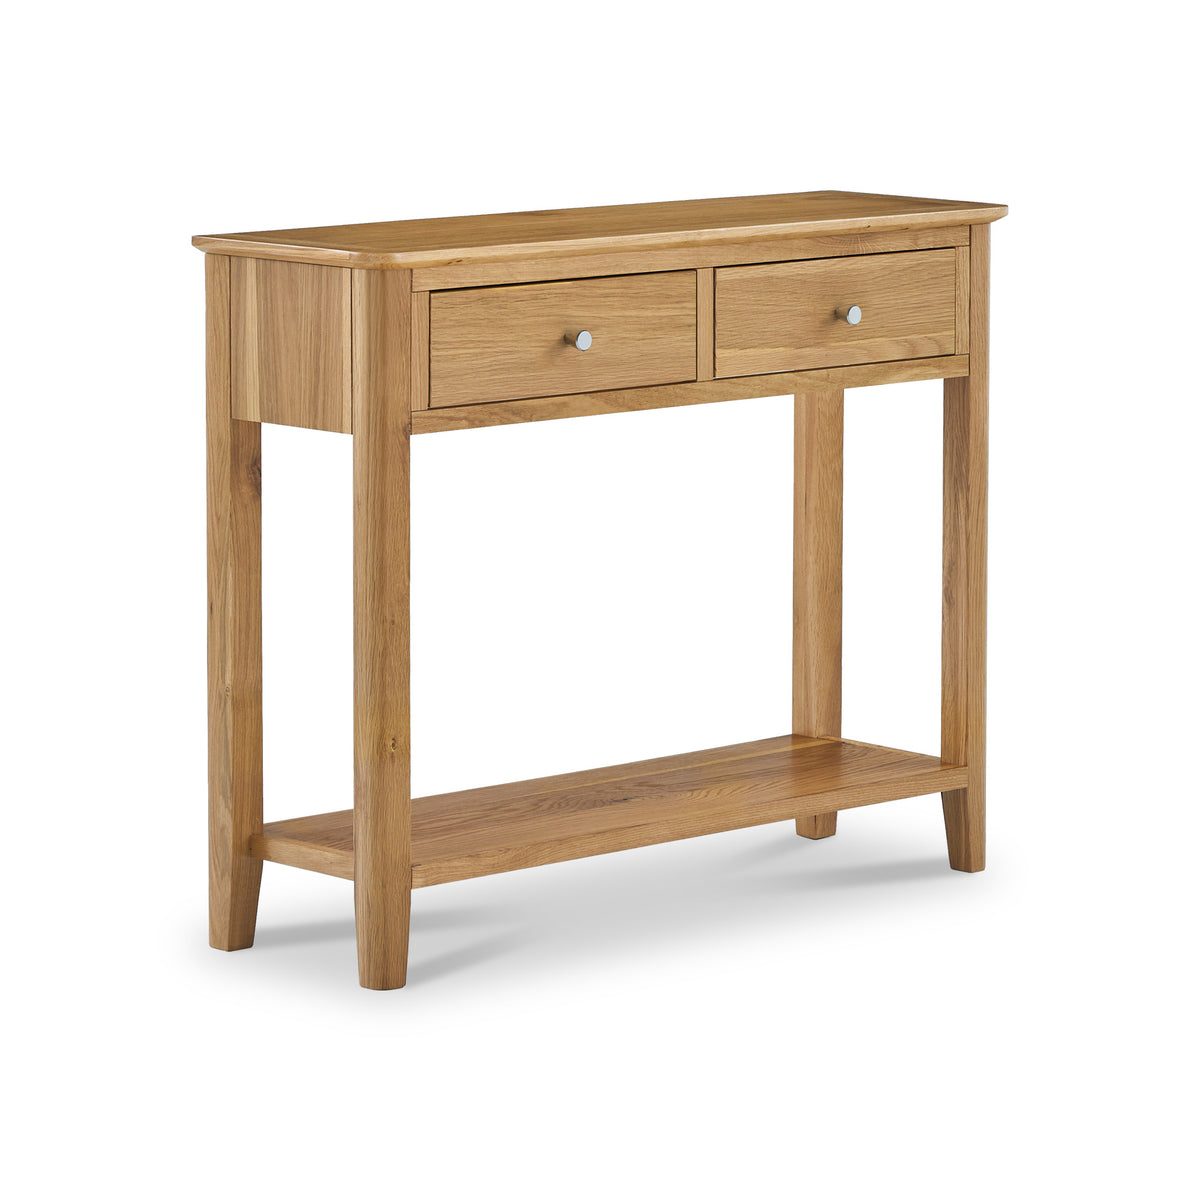 Saxon Oak 2 Drawer Console Table by Roseland Furniture